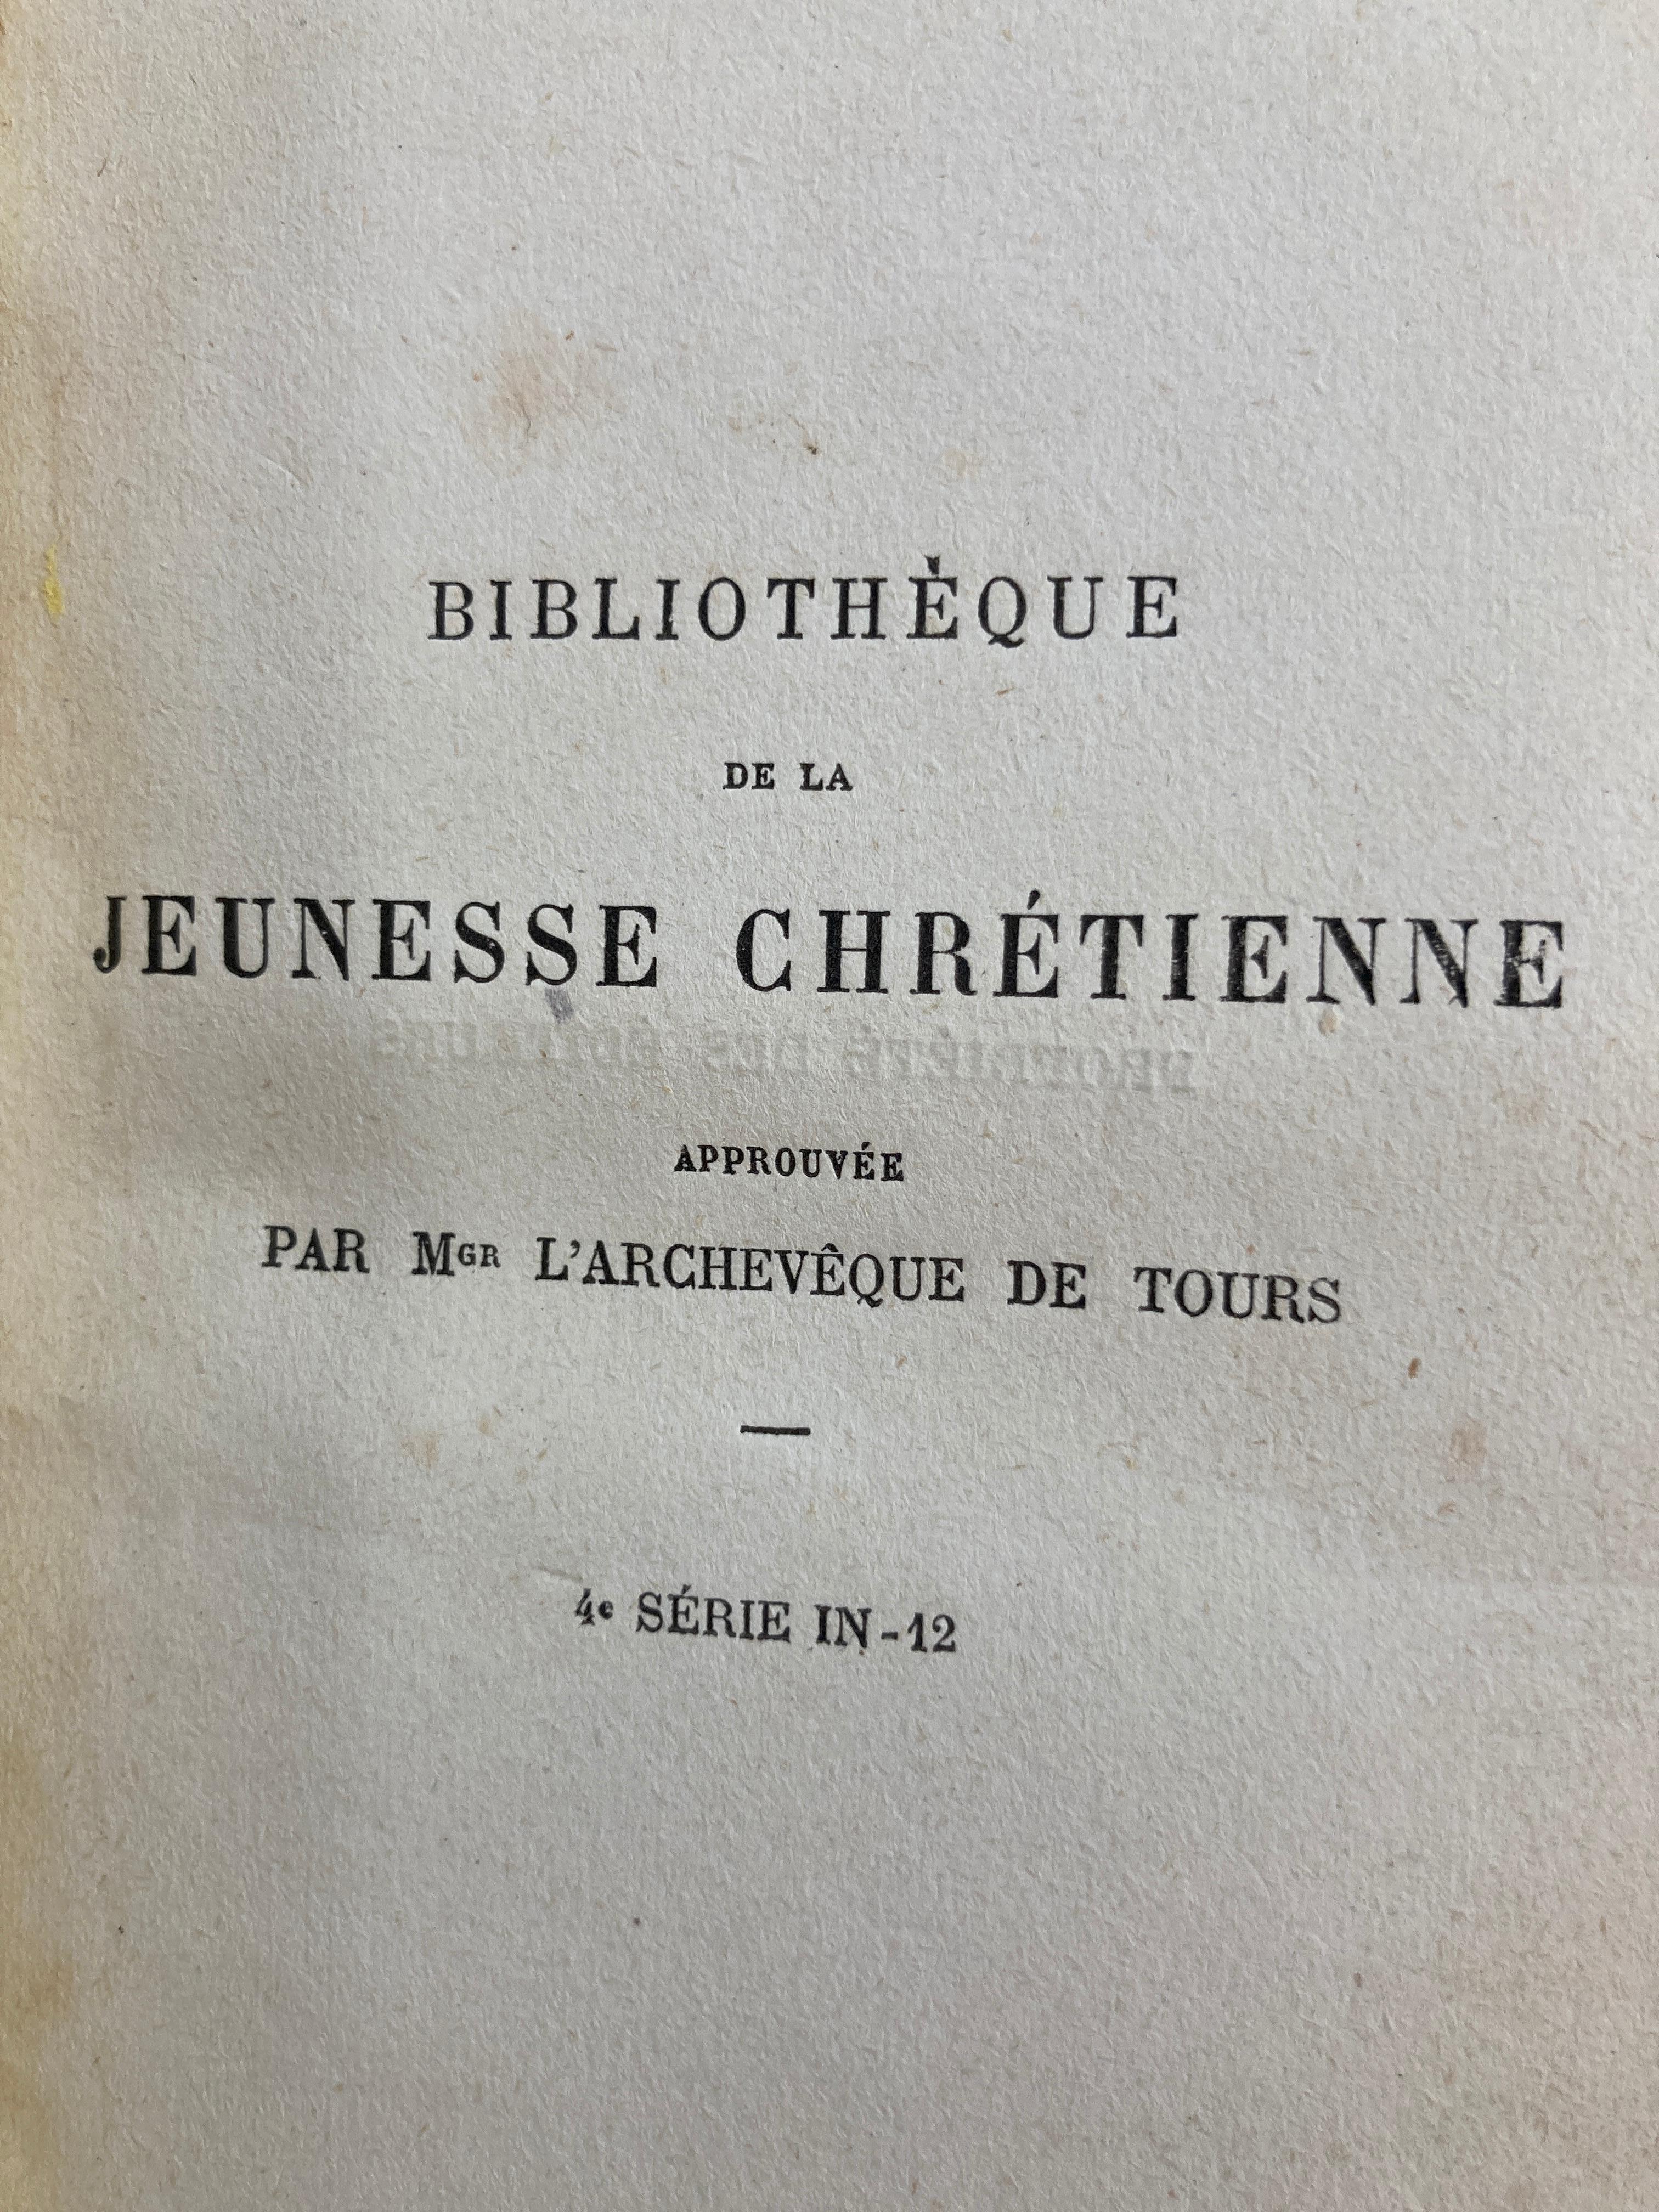 French Antique Youth Library Book Bibliotheque Jeunesse Chretienne 2